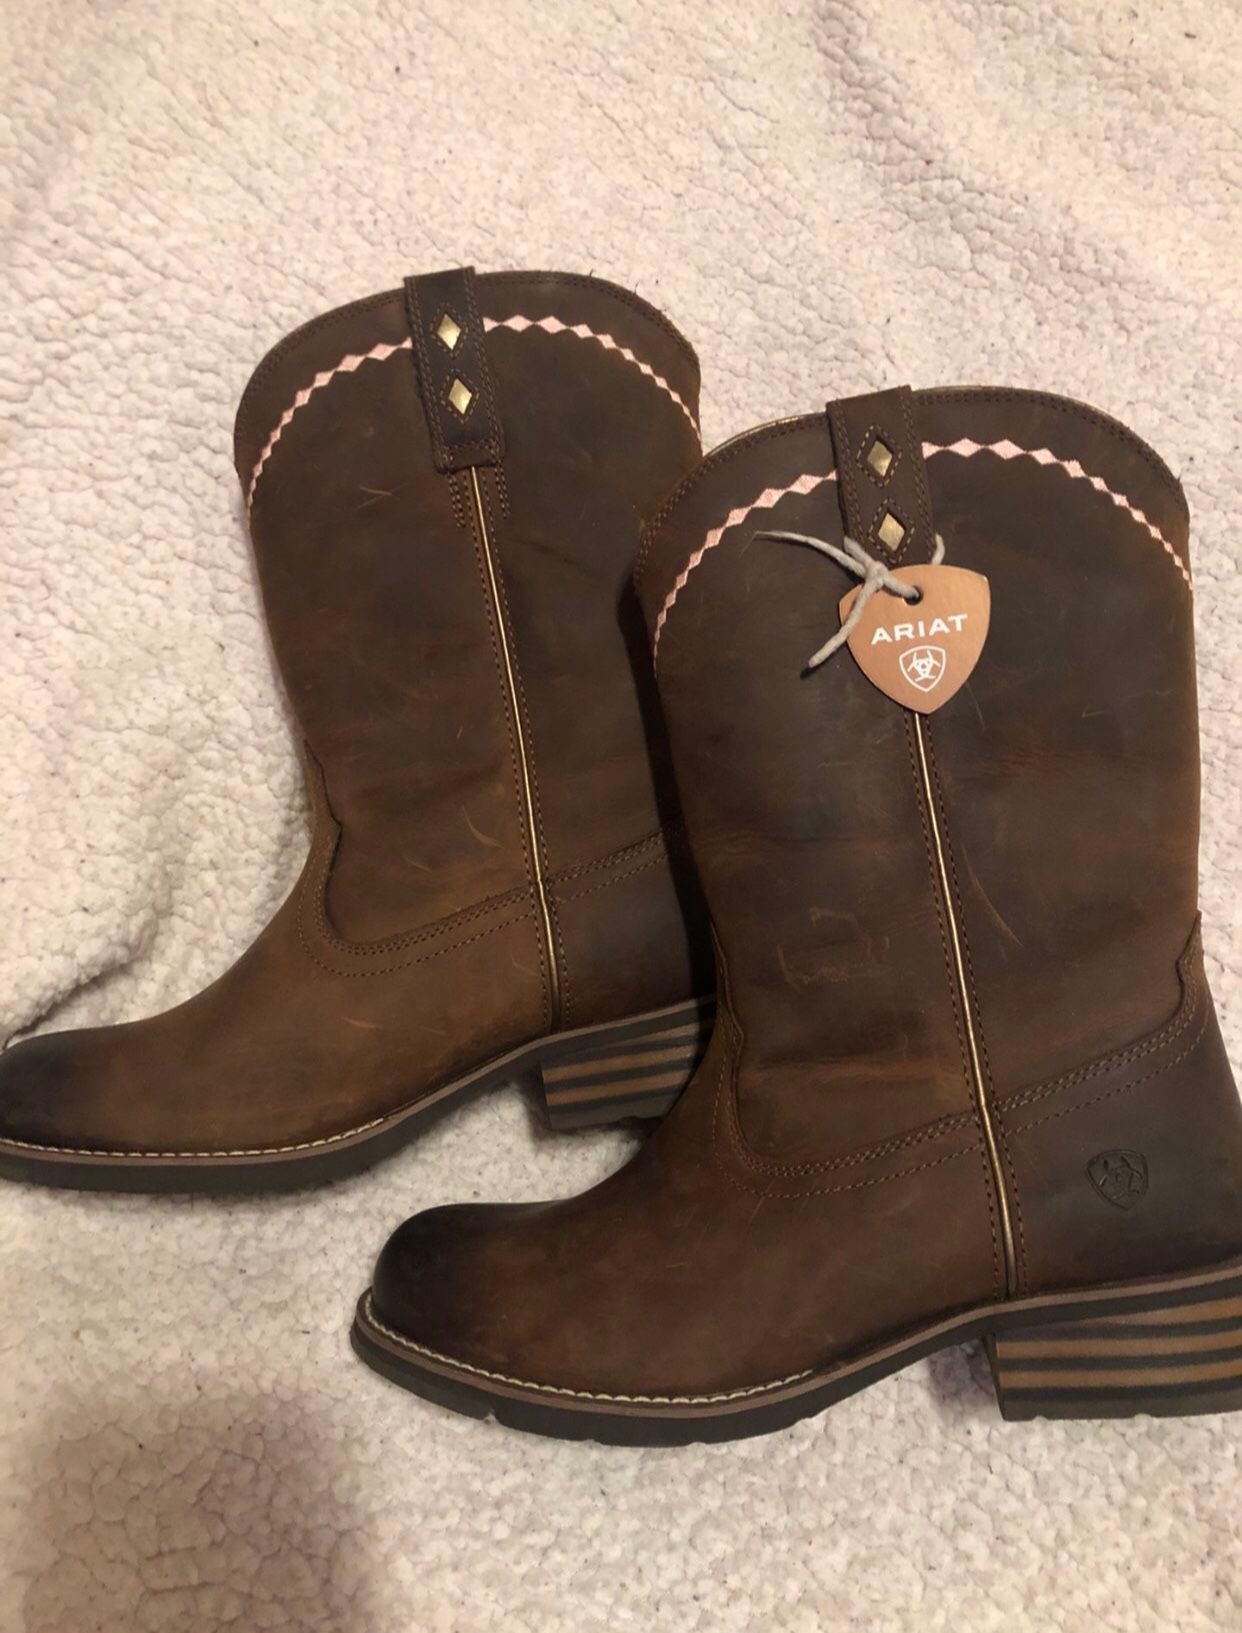 Ariat Boots For Women’s 